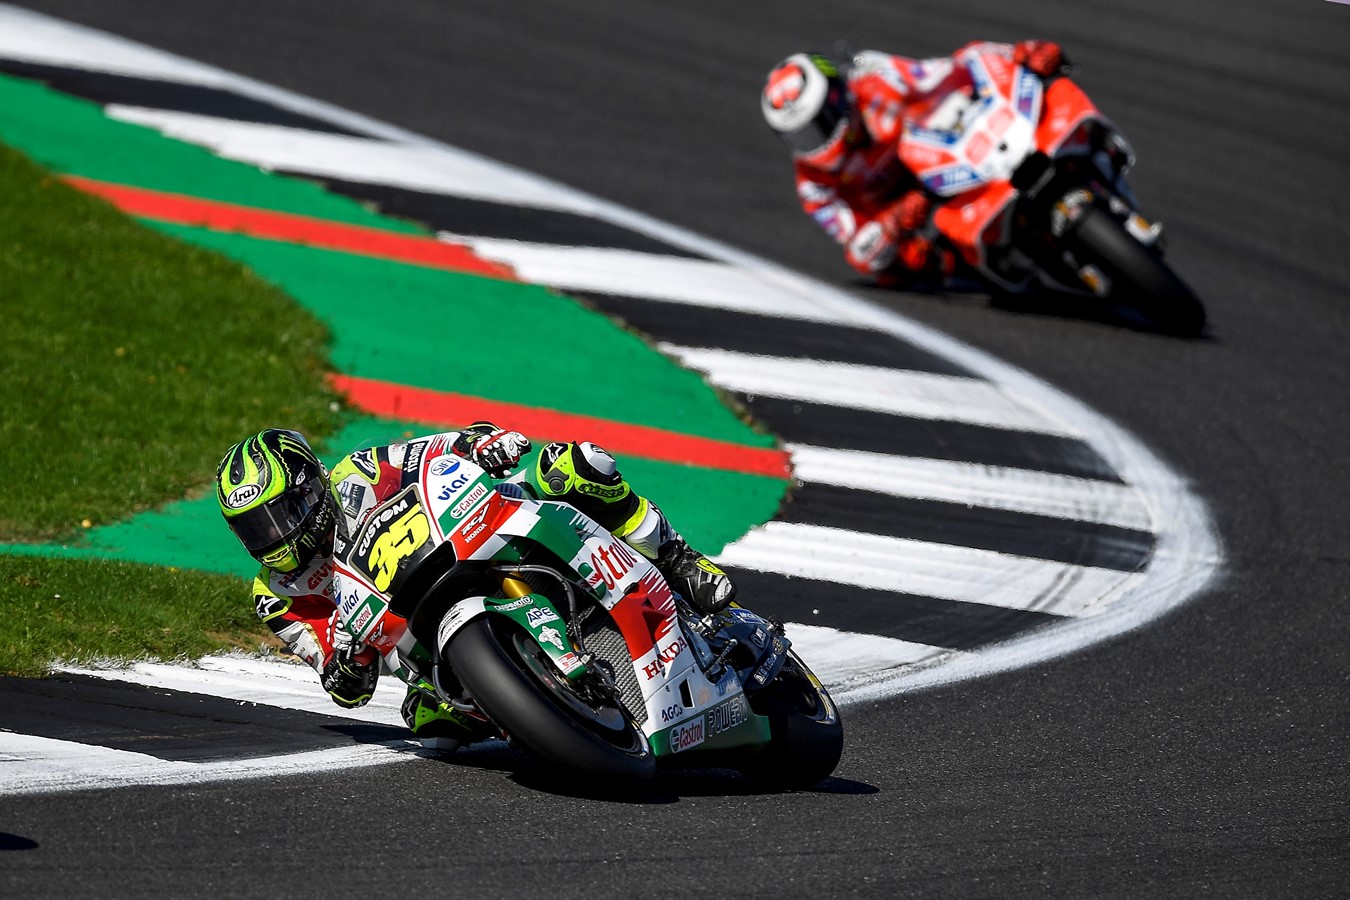 Crutchlow 1.6 Seconds Off British GP Win as Marquez Stops